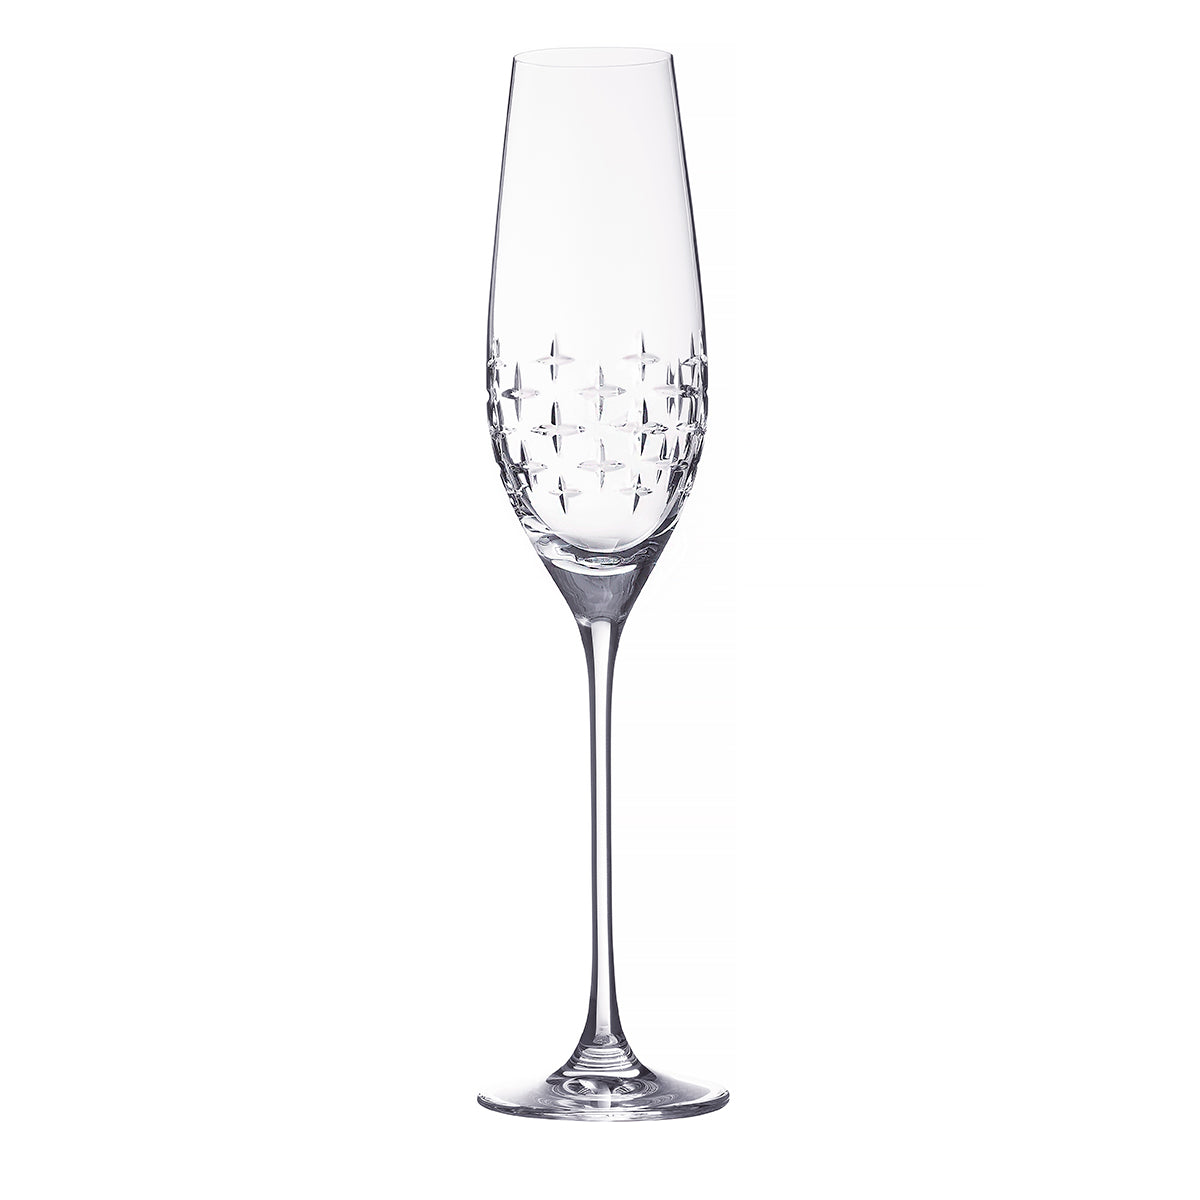 VERRE FLUTE A CHAMPAGNE 21 CL - CEPS